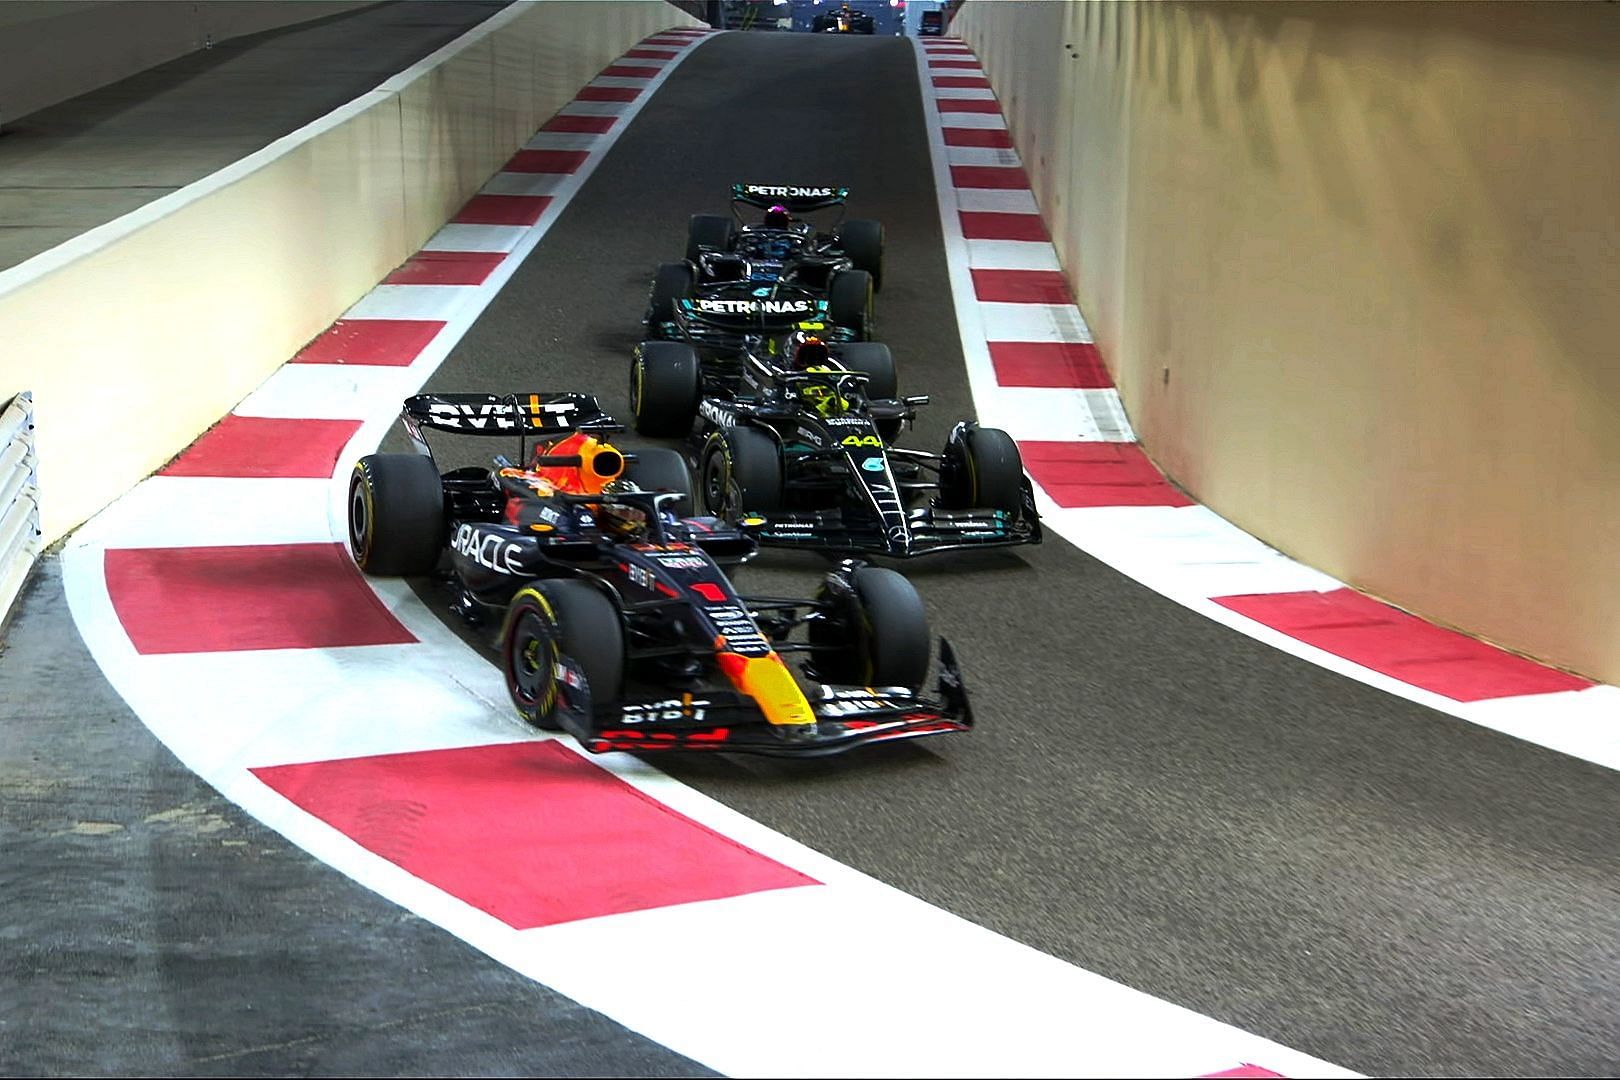 Max Verstappen (1) overtaking Lewis Hamilton (44) and George Russell (63) on the pit exit road during practice at the 2023 F1 Abu Dhabi Grand Prix (Image via X/@F1)